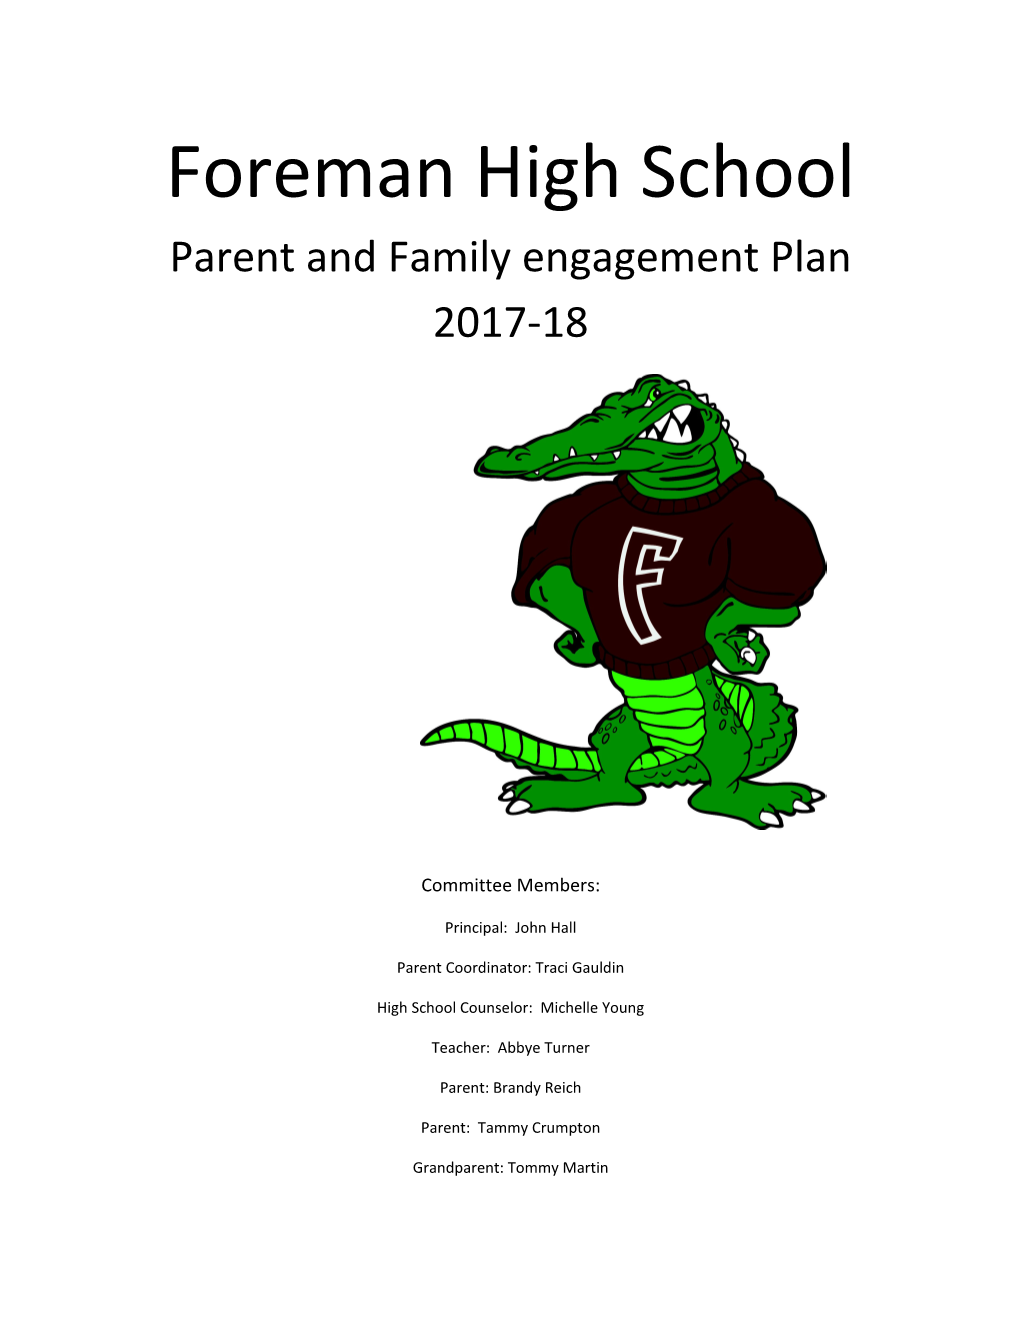 The Foreman High School Parent and Family Engagement Plan Is a Document That Provides Parents